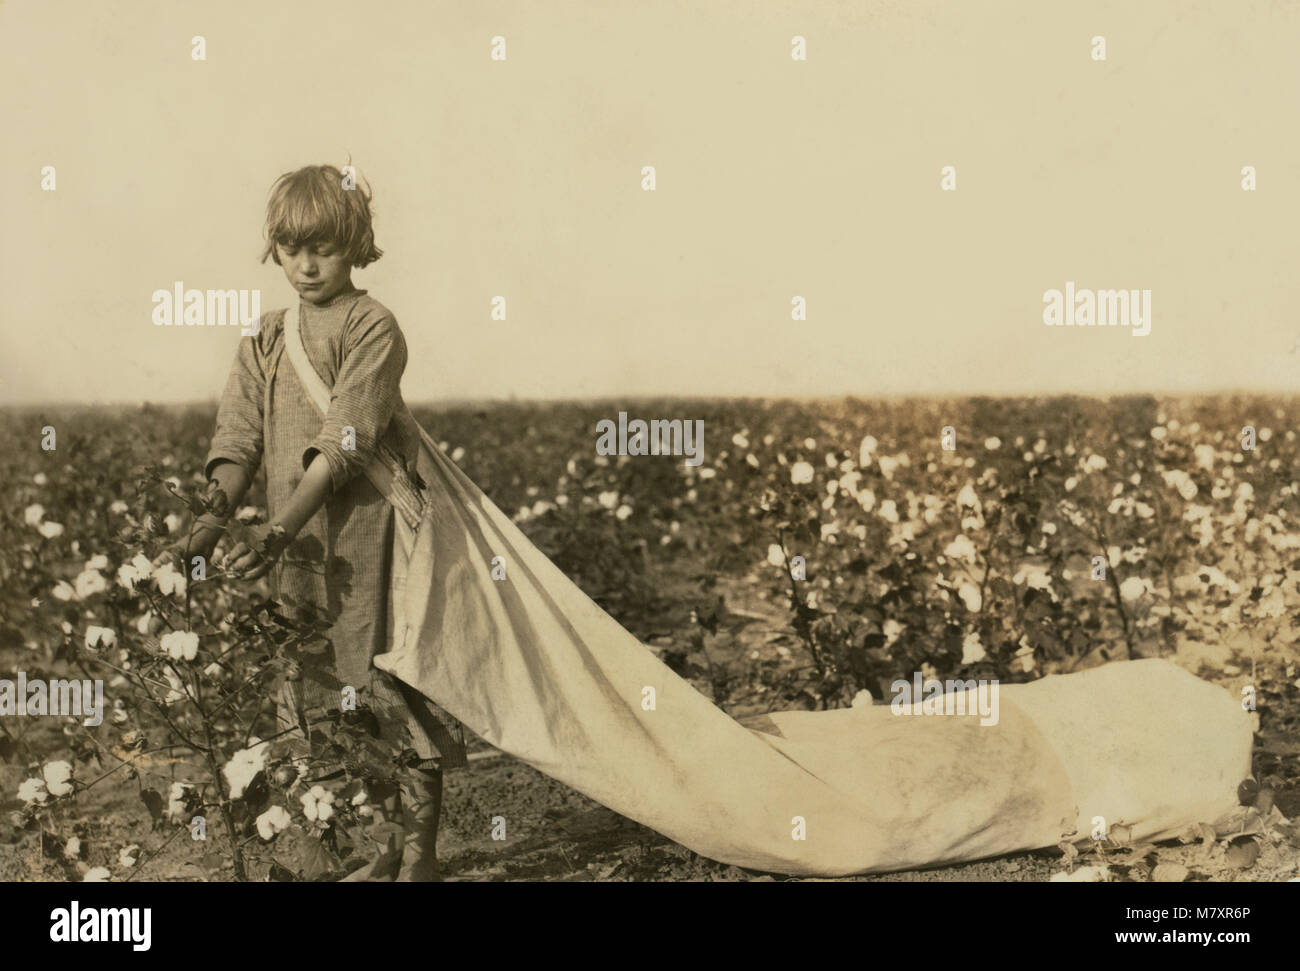 Norma Lawrence, 10 years old, Full-Length Portrait, Cotton Picker, Picks 100 to 150 pounds of Cotton per day, Comanche County, Oklahoma, USA, Lewis Hine for National Child Labor Committee, October 1916 Stock Photo